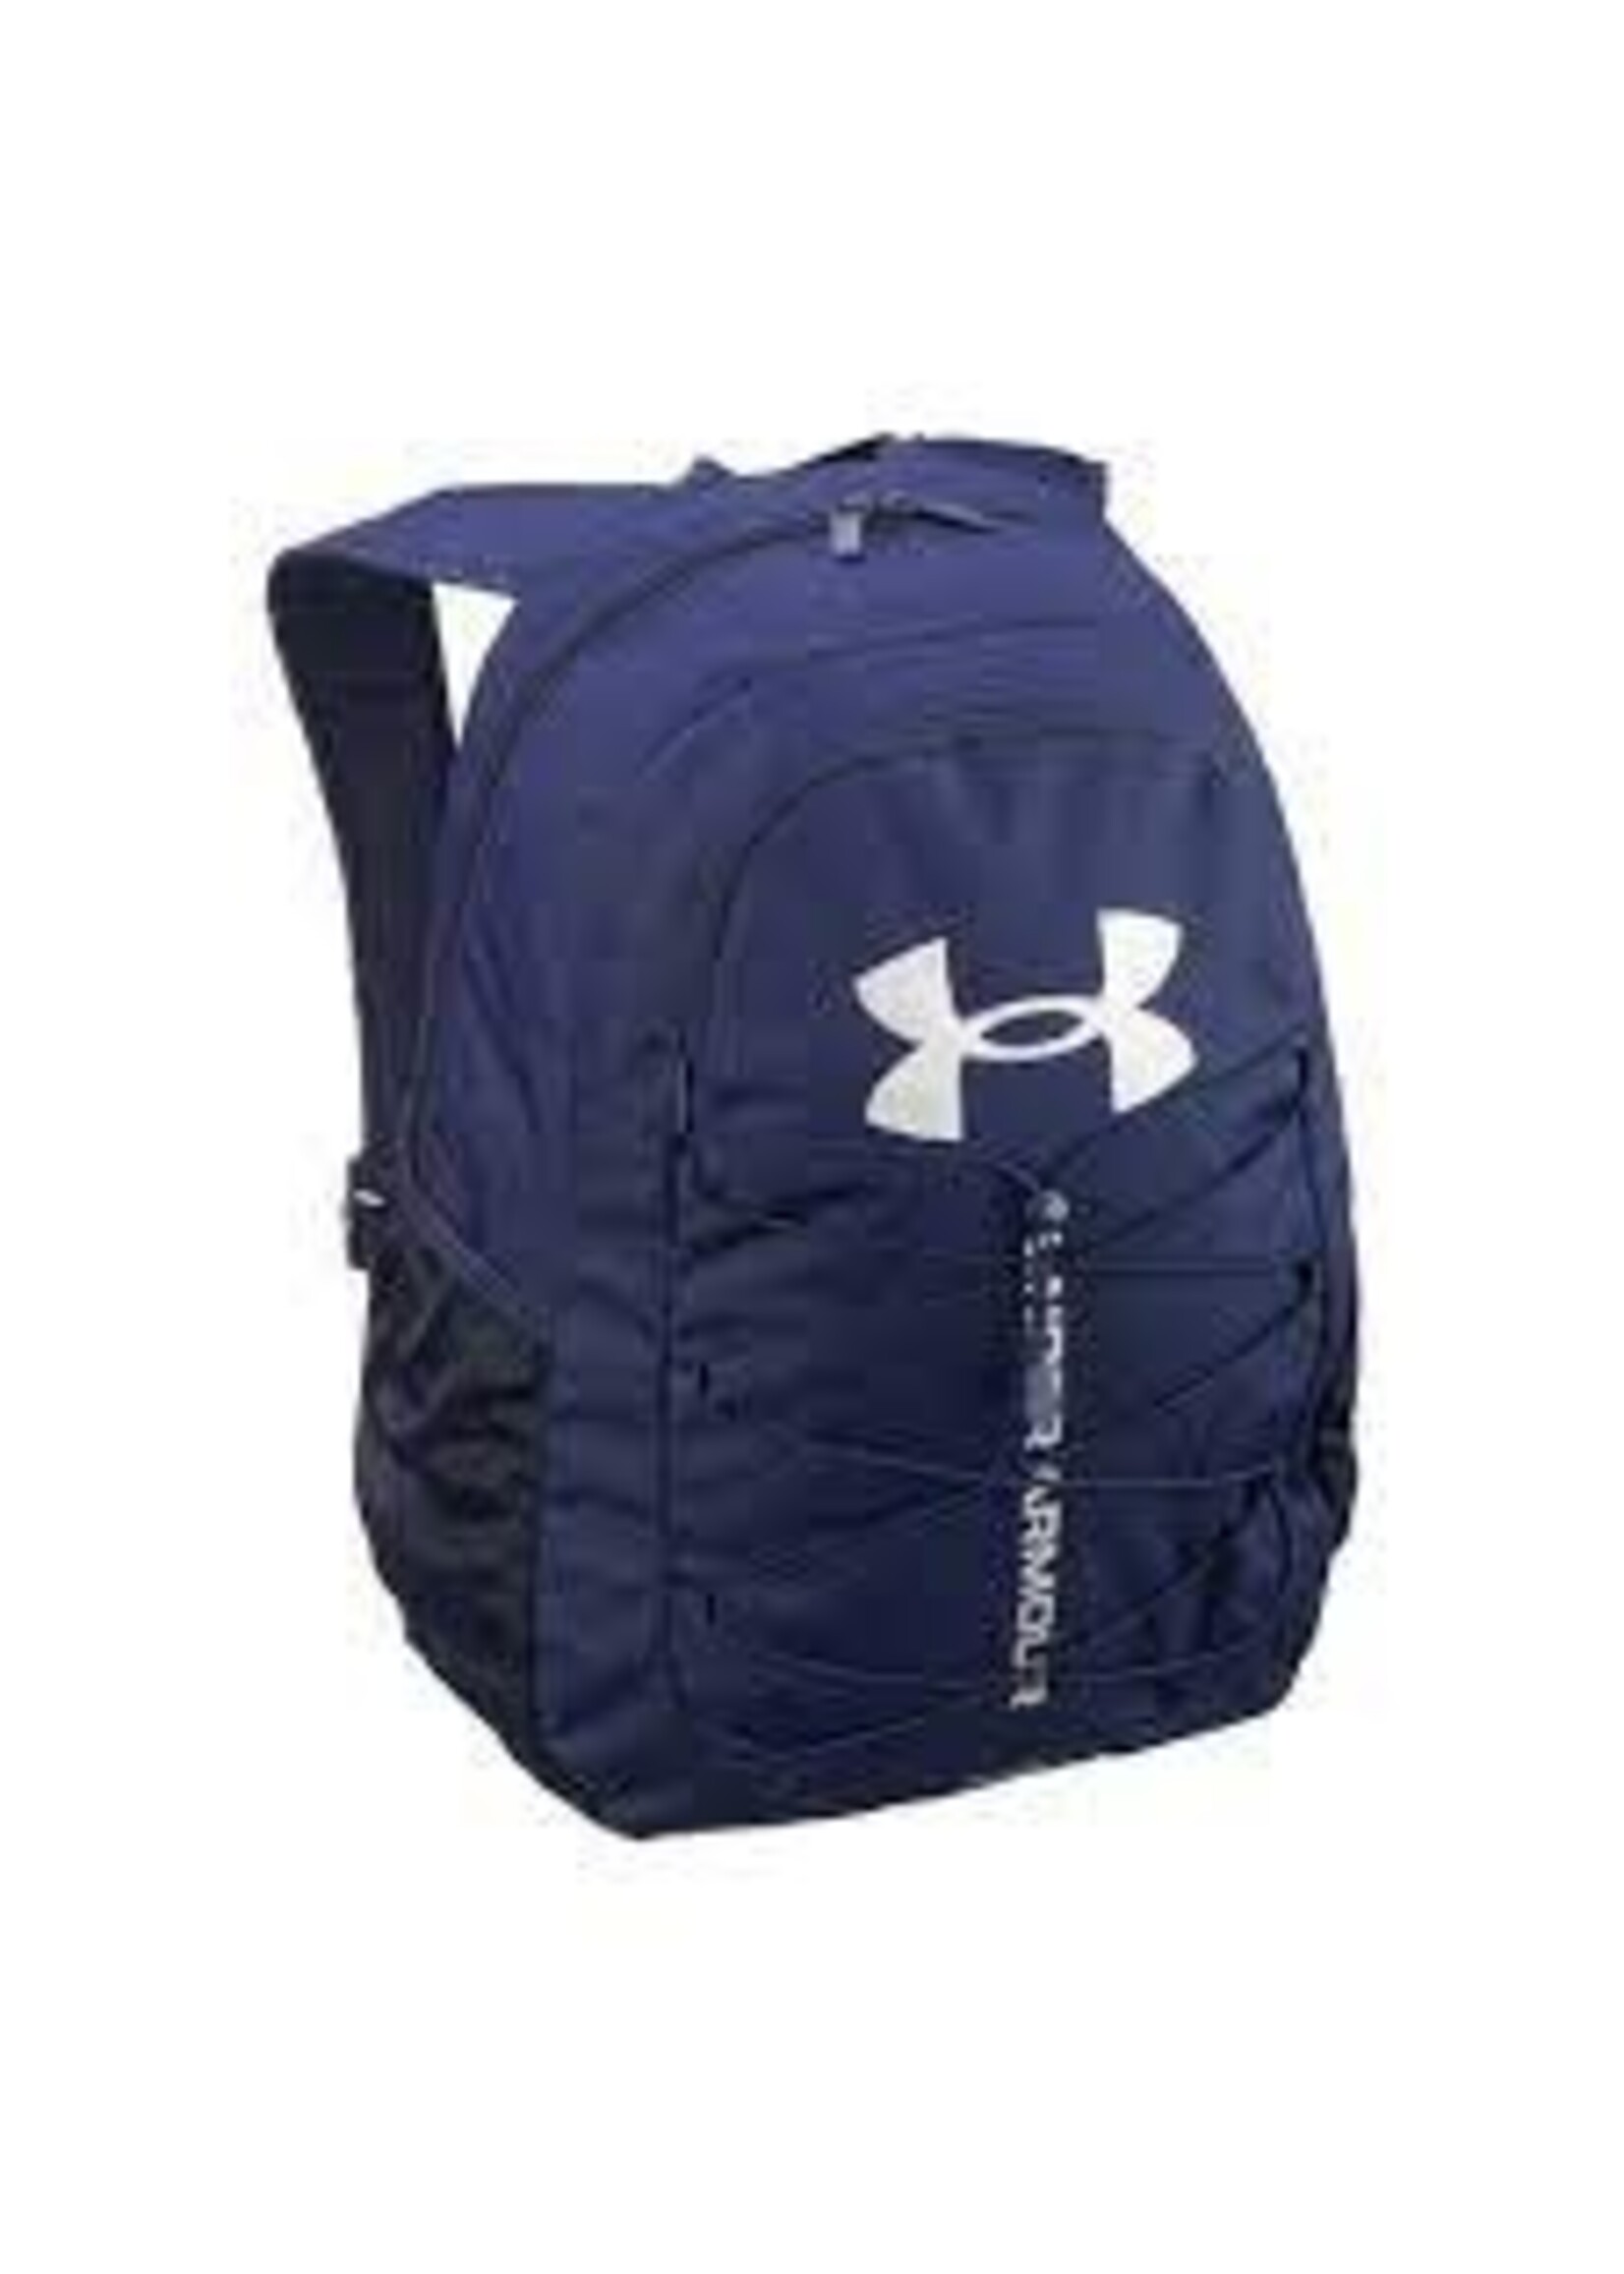 Hustle Sport Backpack by Under Armour 1364181